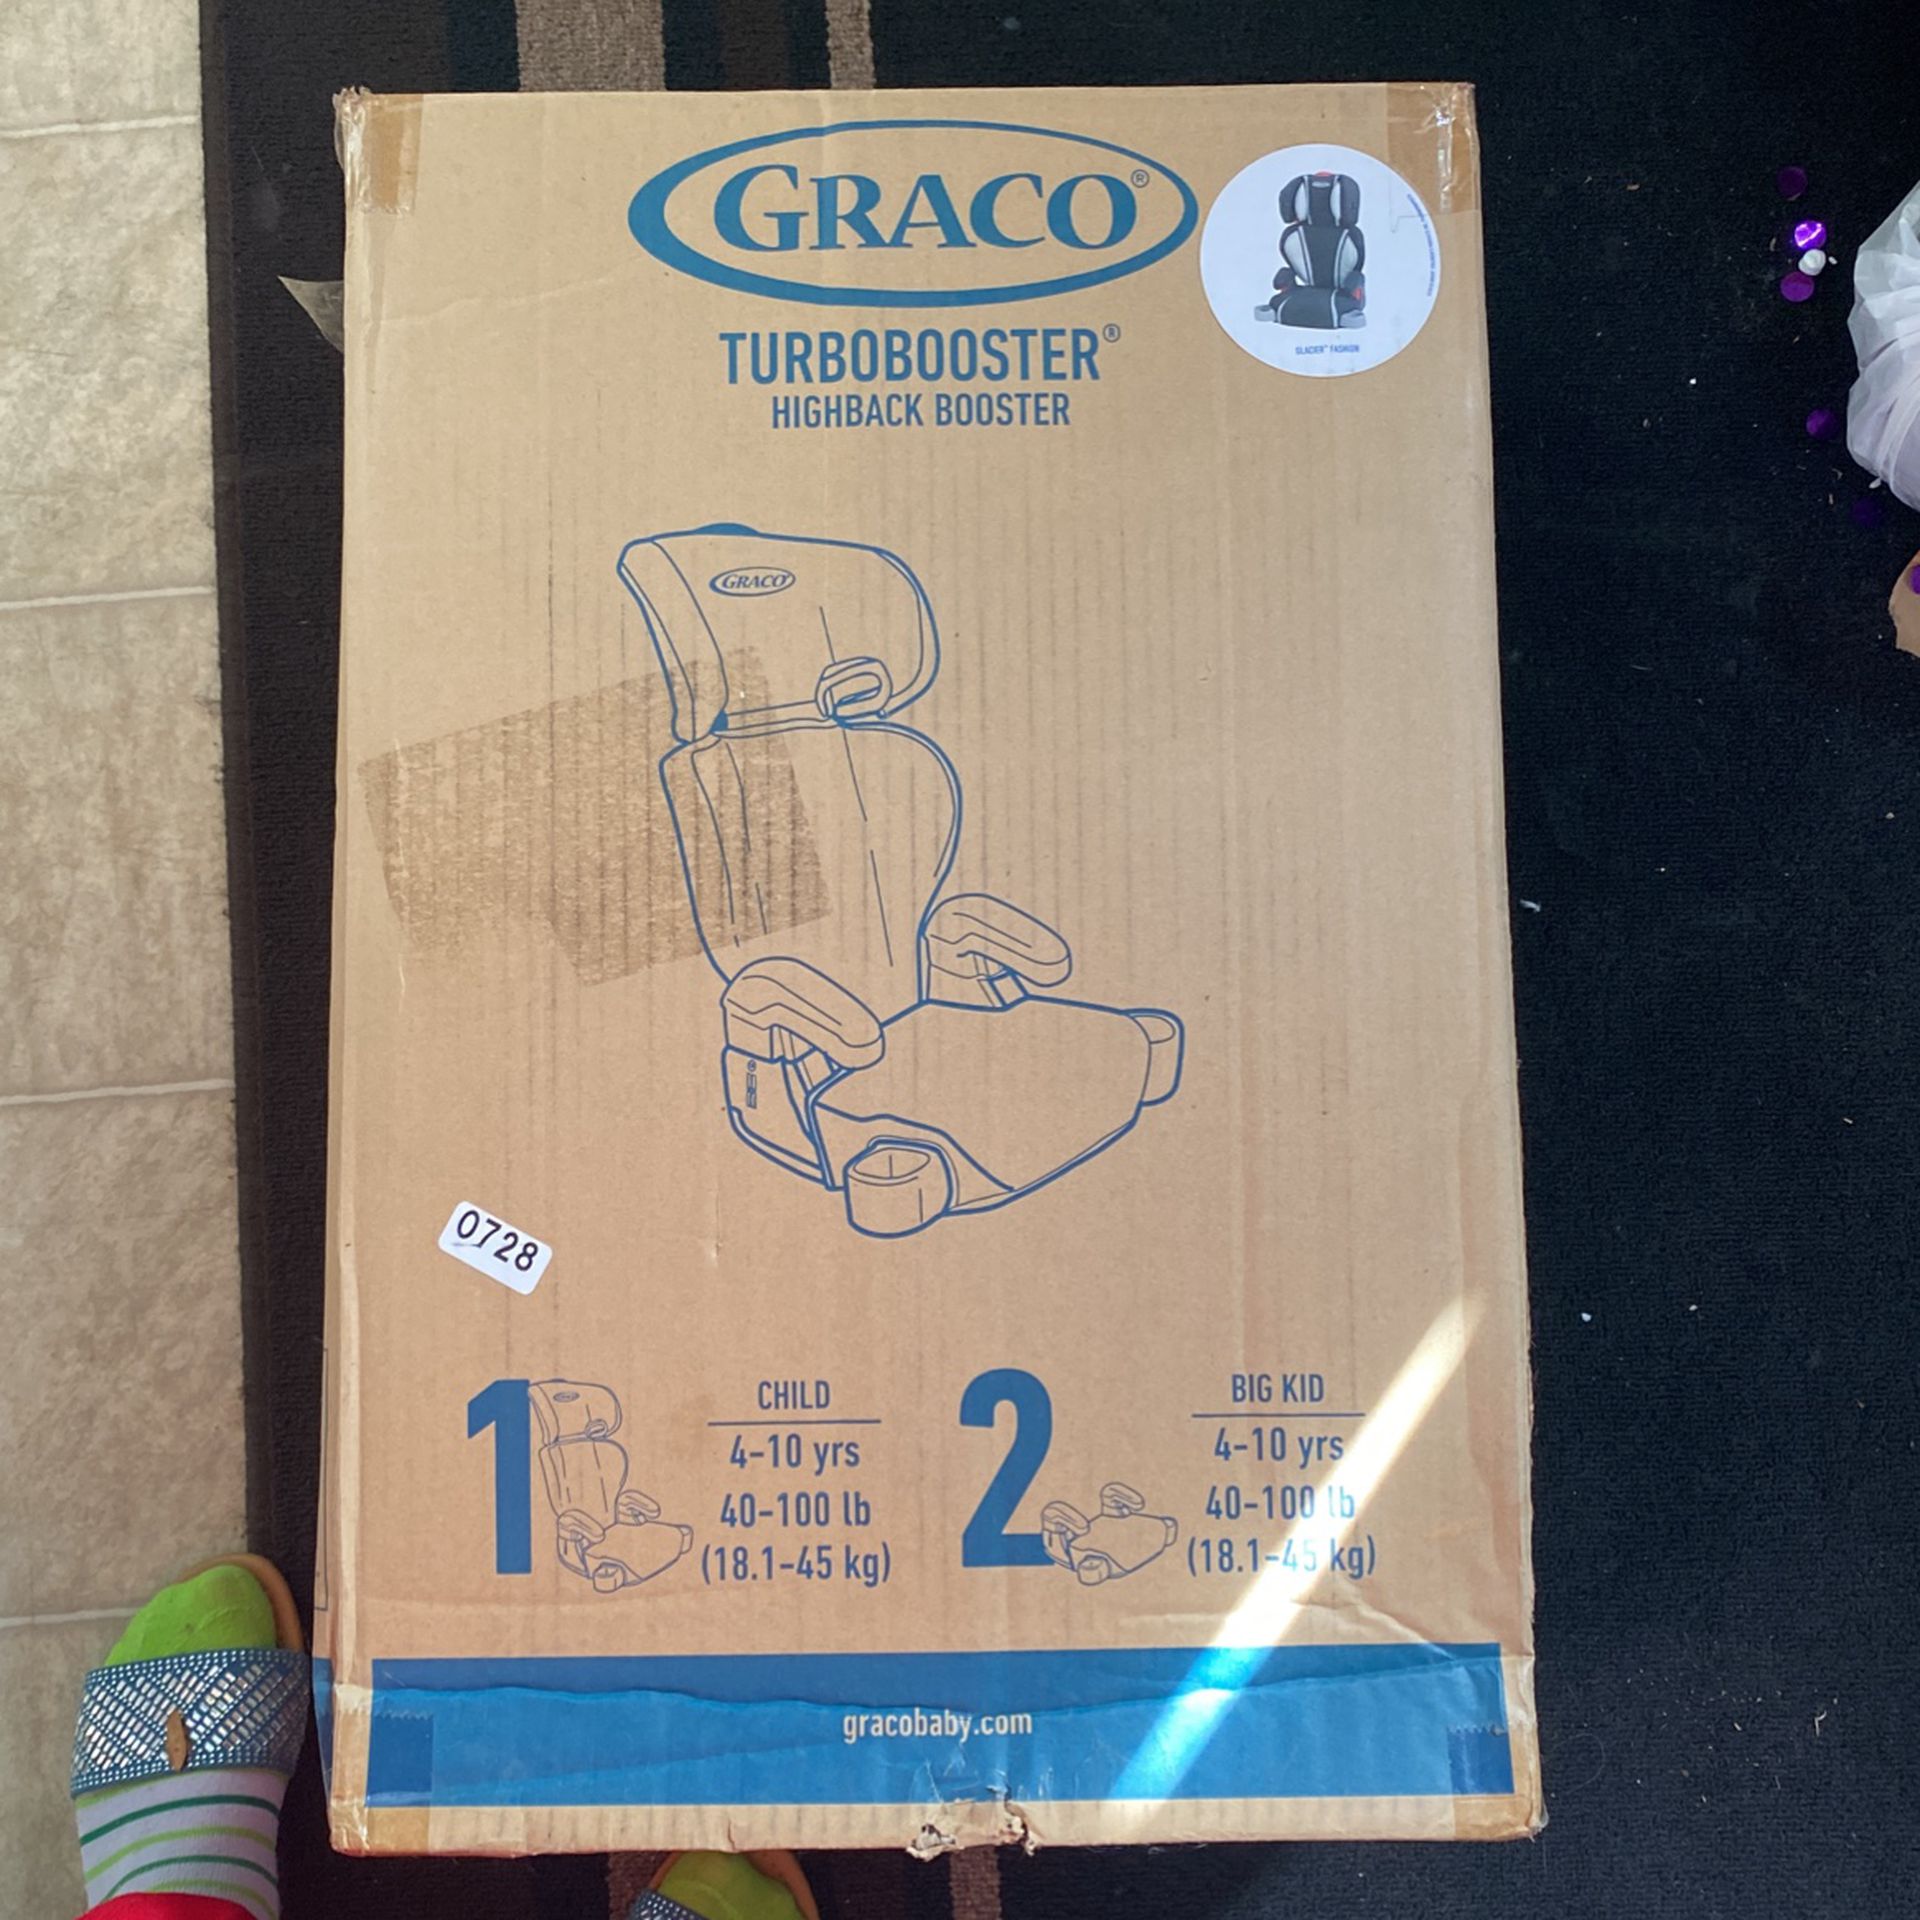 GRACO TURBOBOOSTER HIGHBACK BOOSTER